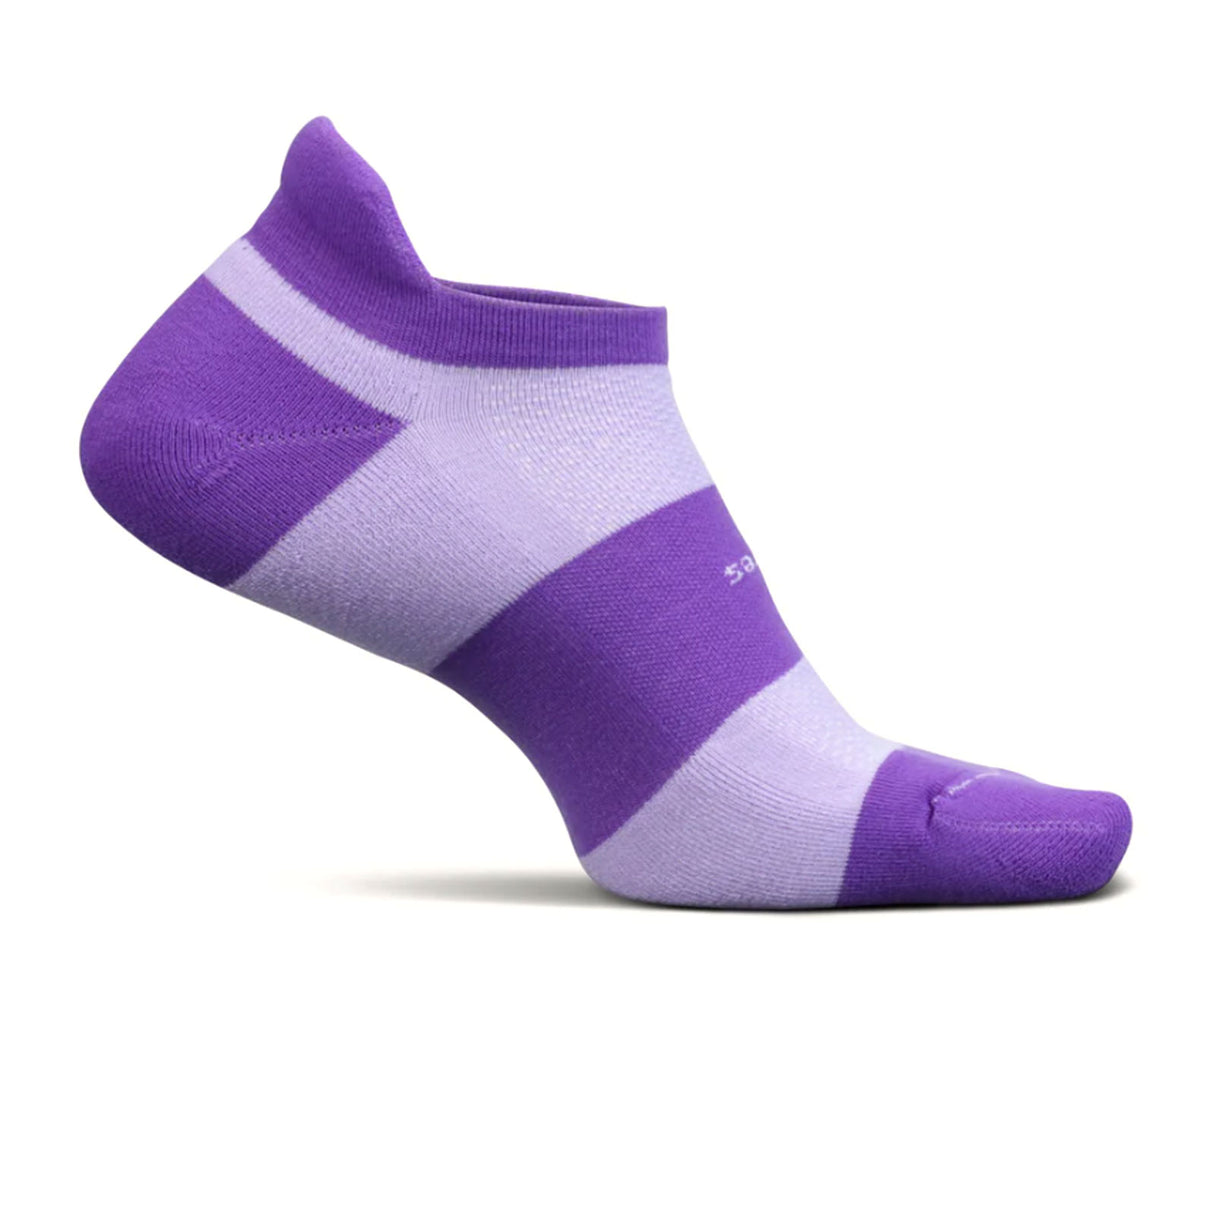 Feetures High Performance Ultra Light No Show Tab (Unisex) - Lace Up Lavender Socks - Life - No Show - The Heel Shoe Fitters